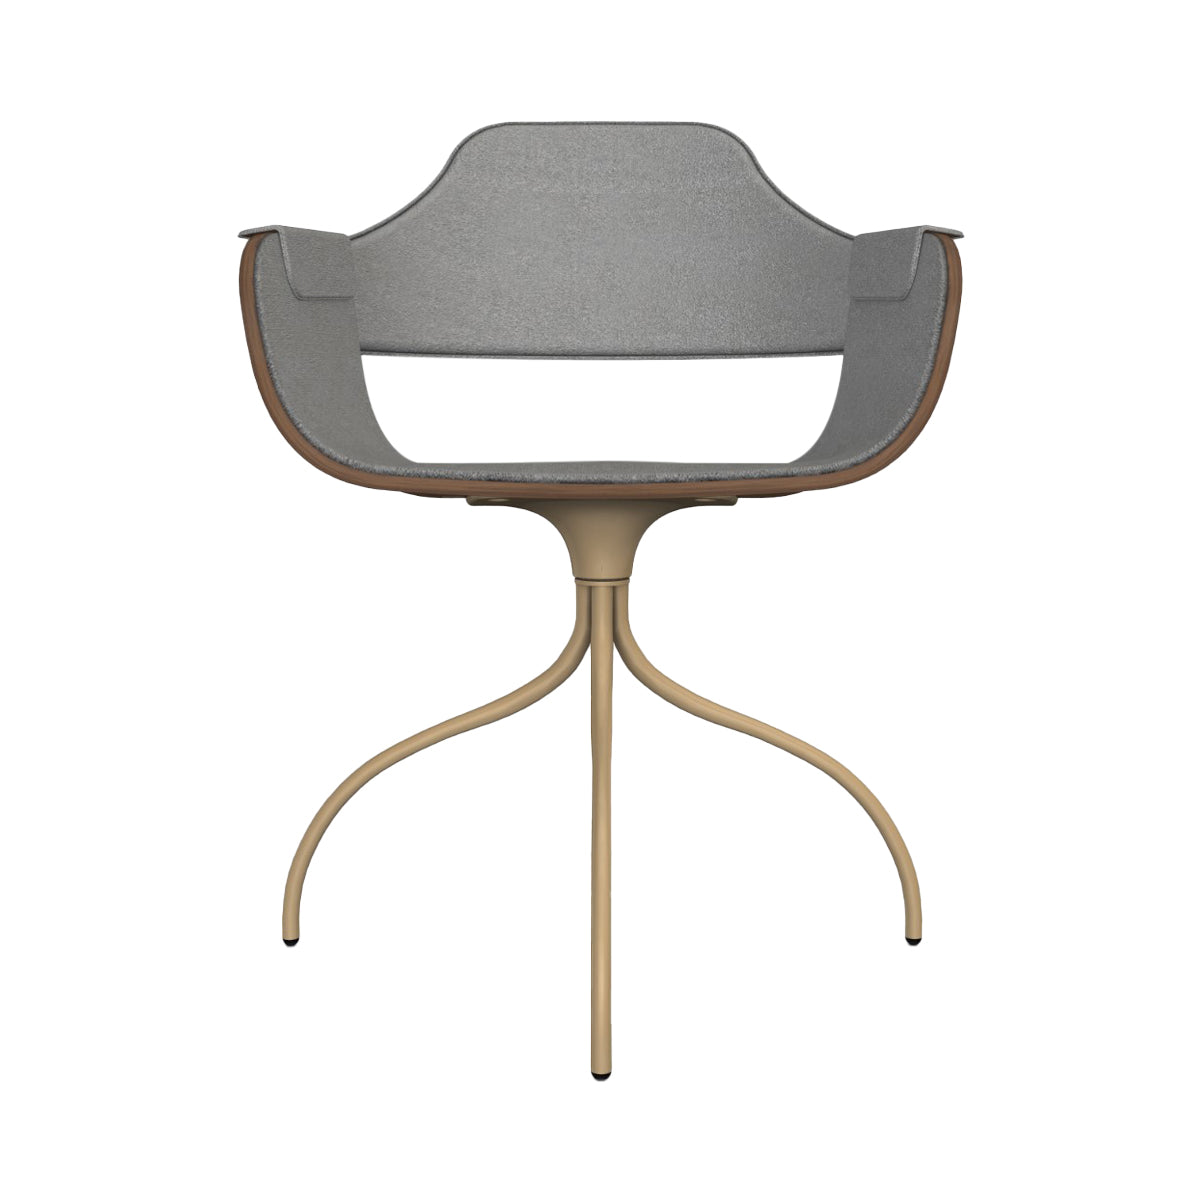 Showtime Chair with Swivel Base: Full Upholstered + Beige